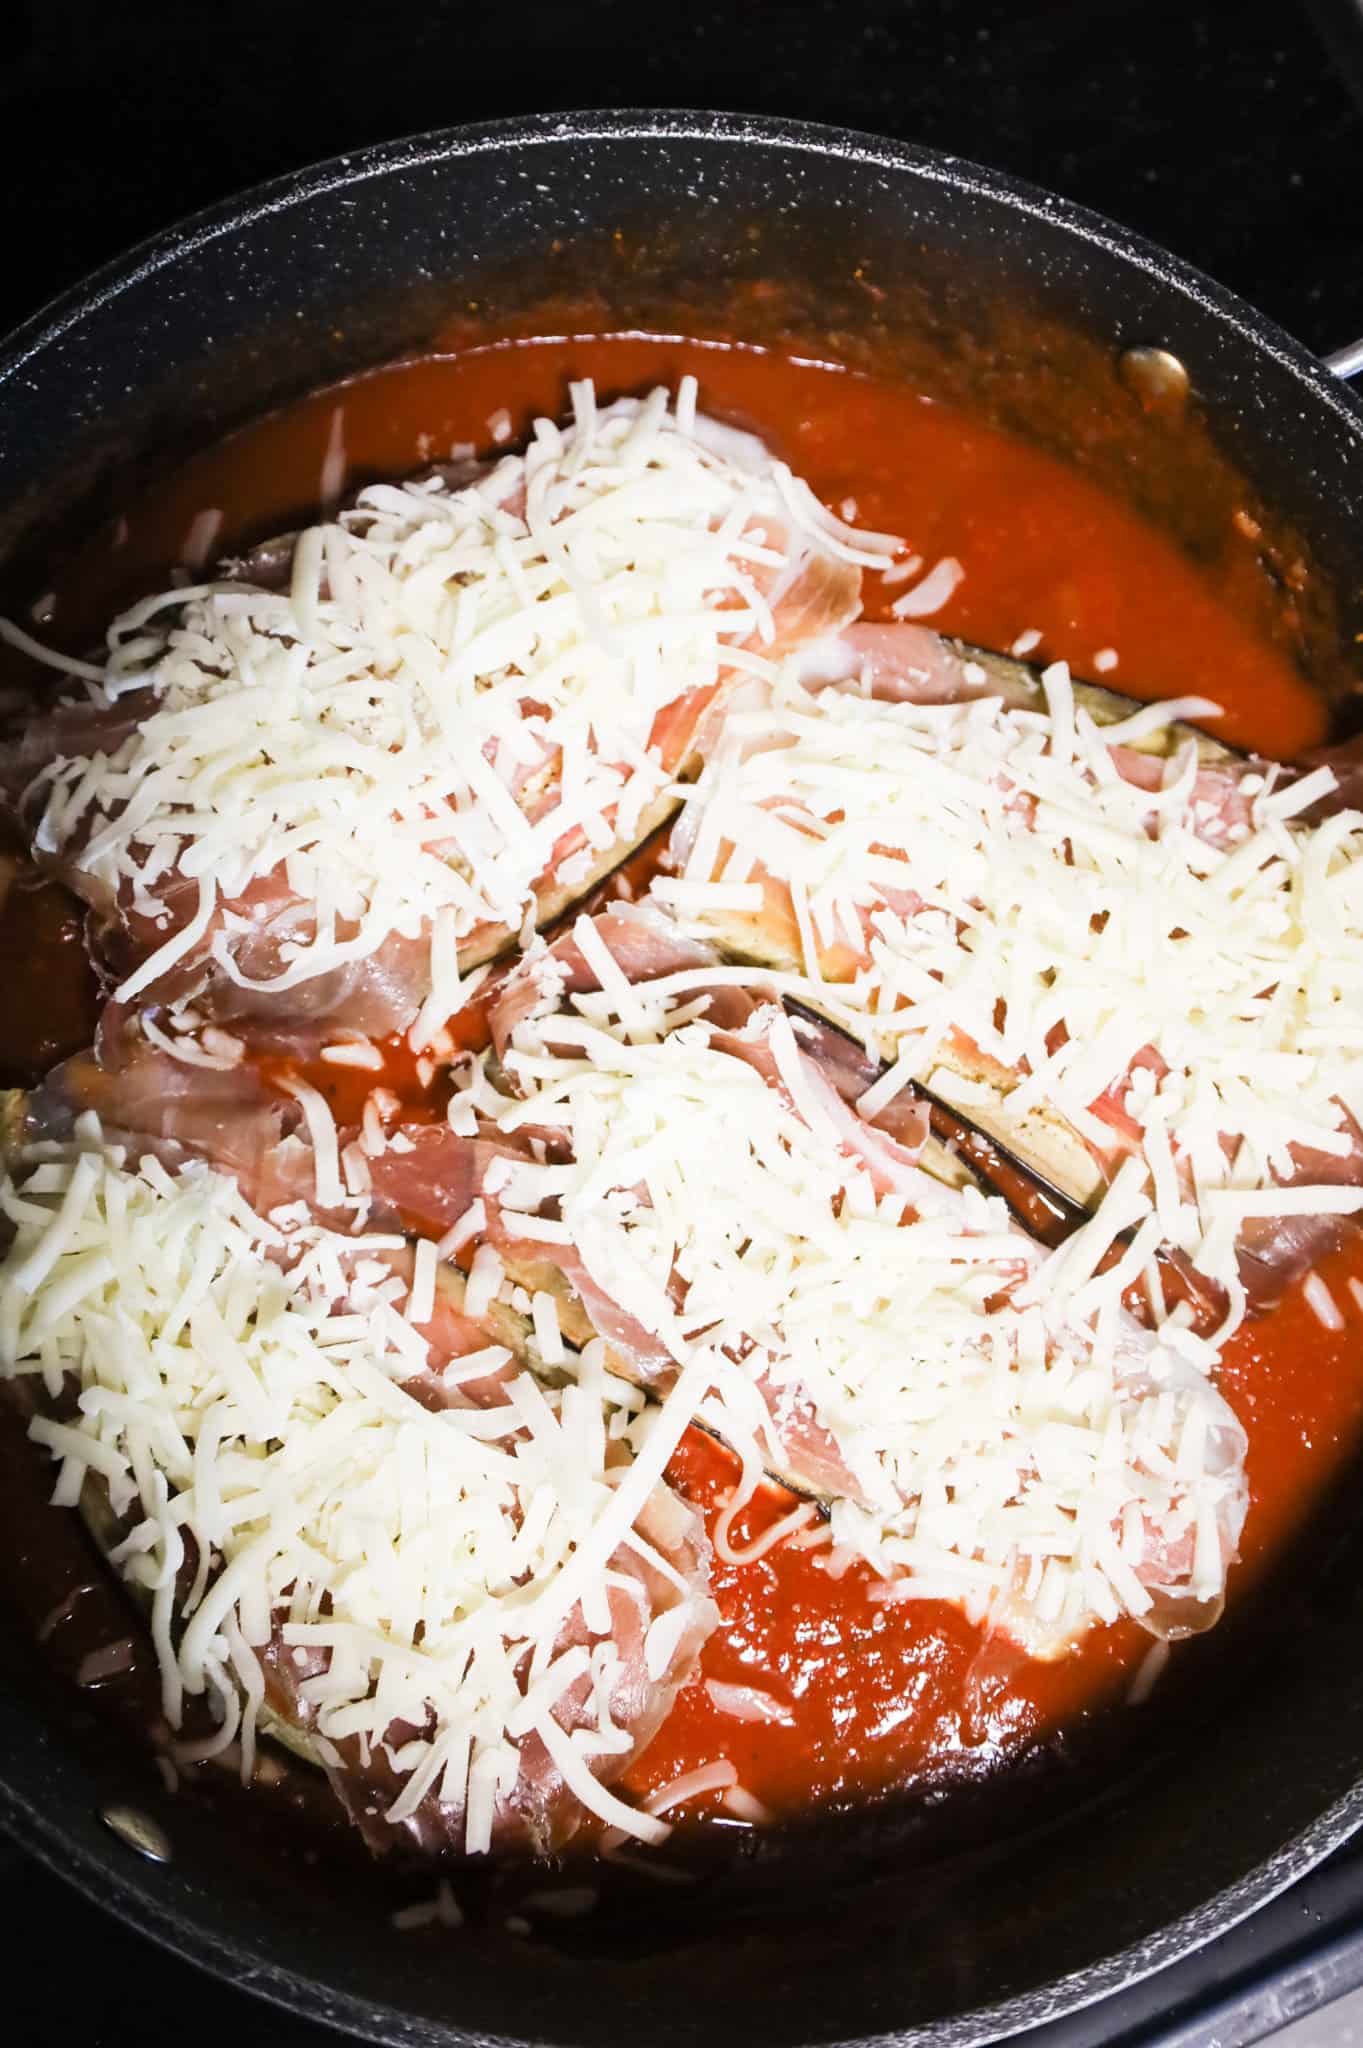 shredded cheese on top of prosciutto, eggplant and chicken cutlets in a skillet with tomato sauce